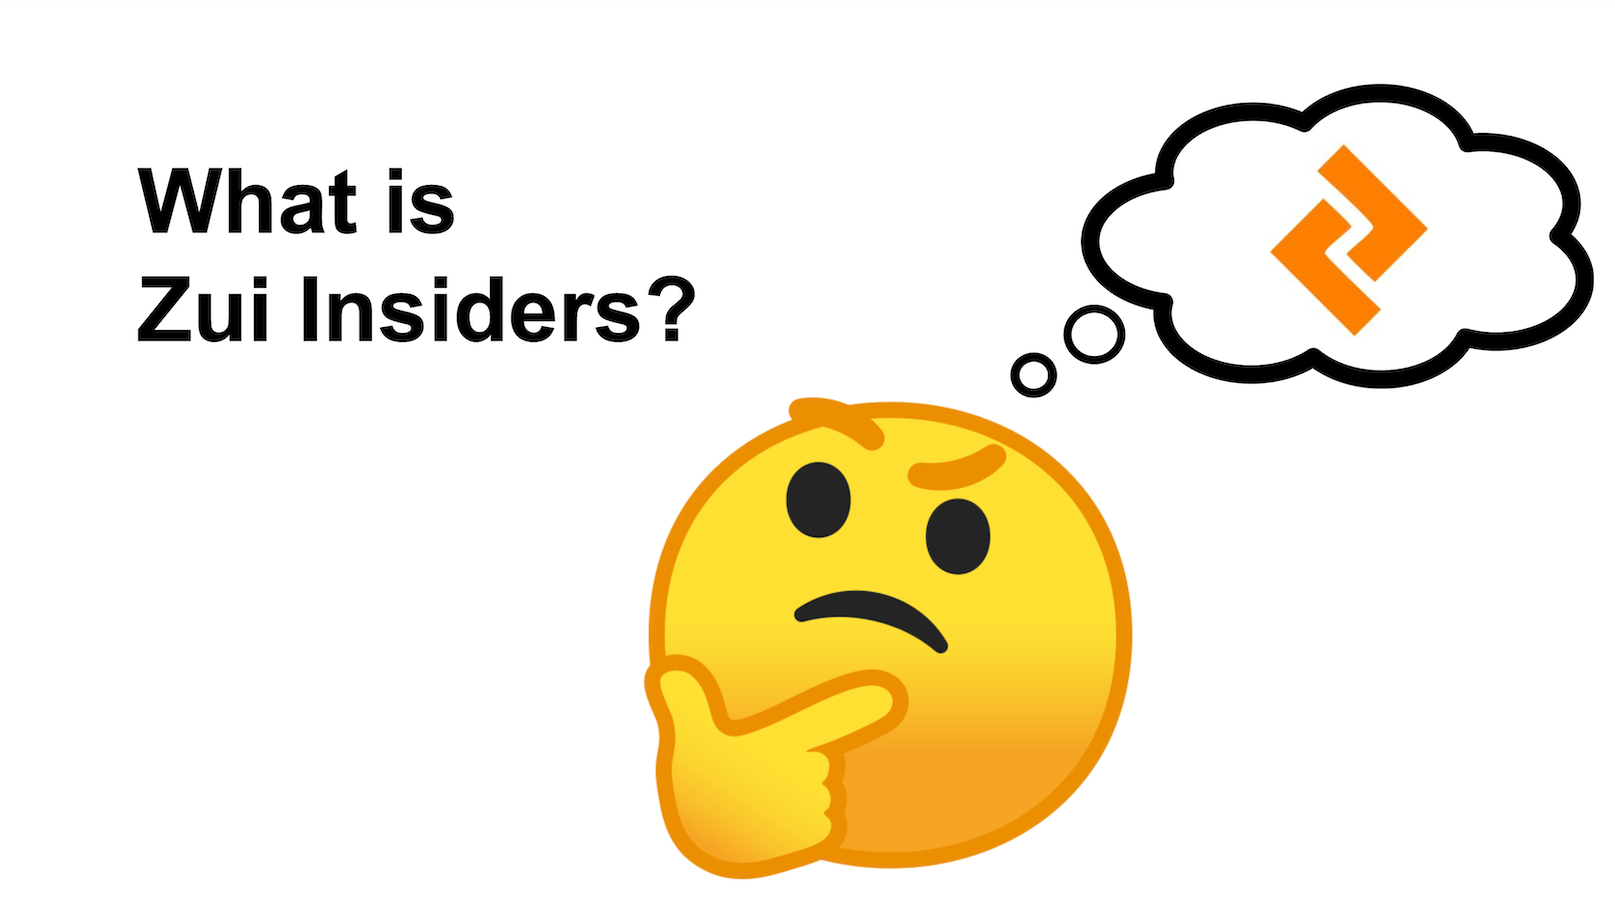 What is Zui Insiders?